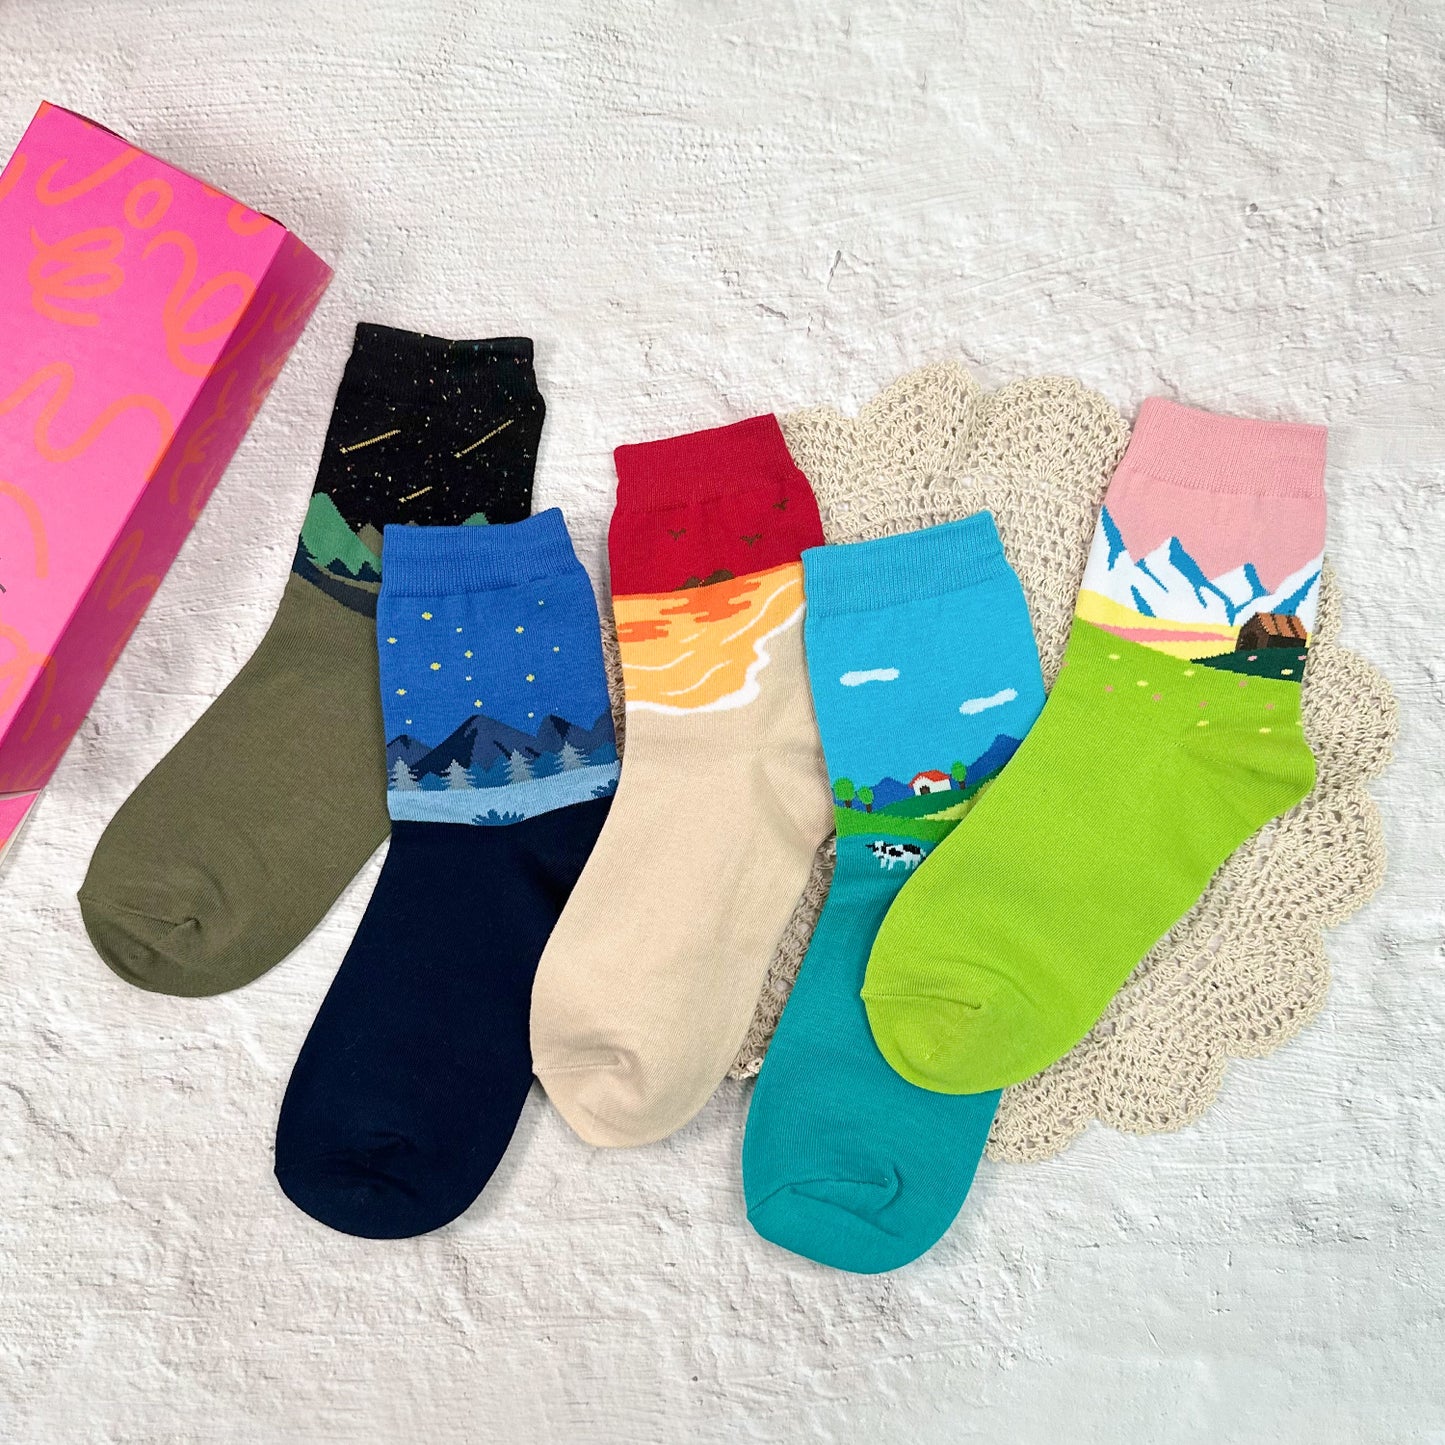 Women's Crew Together With You Socks